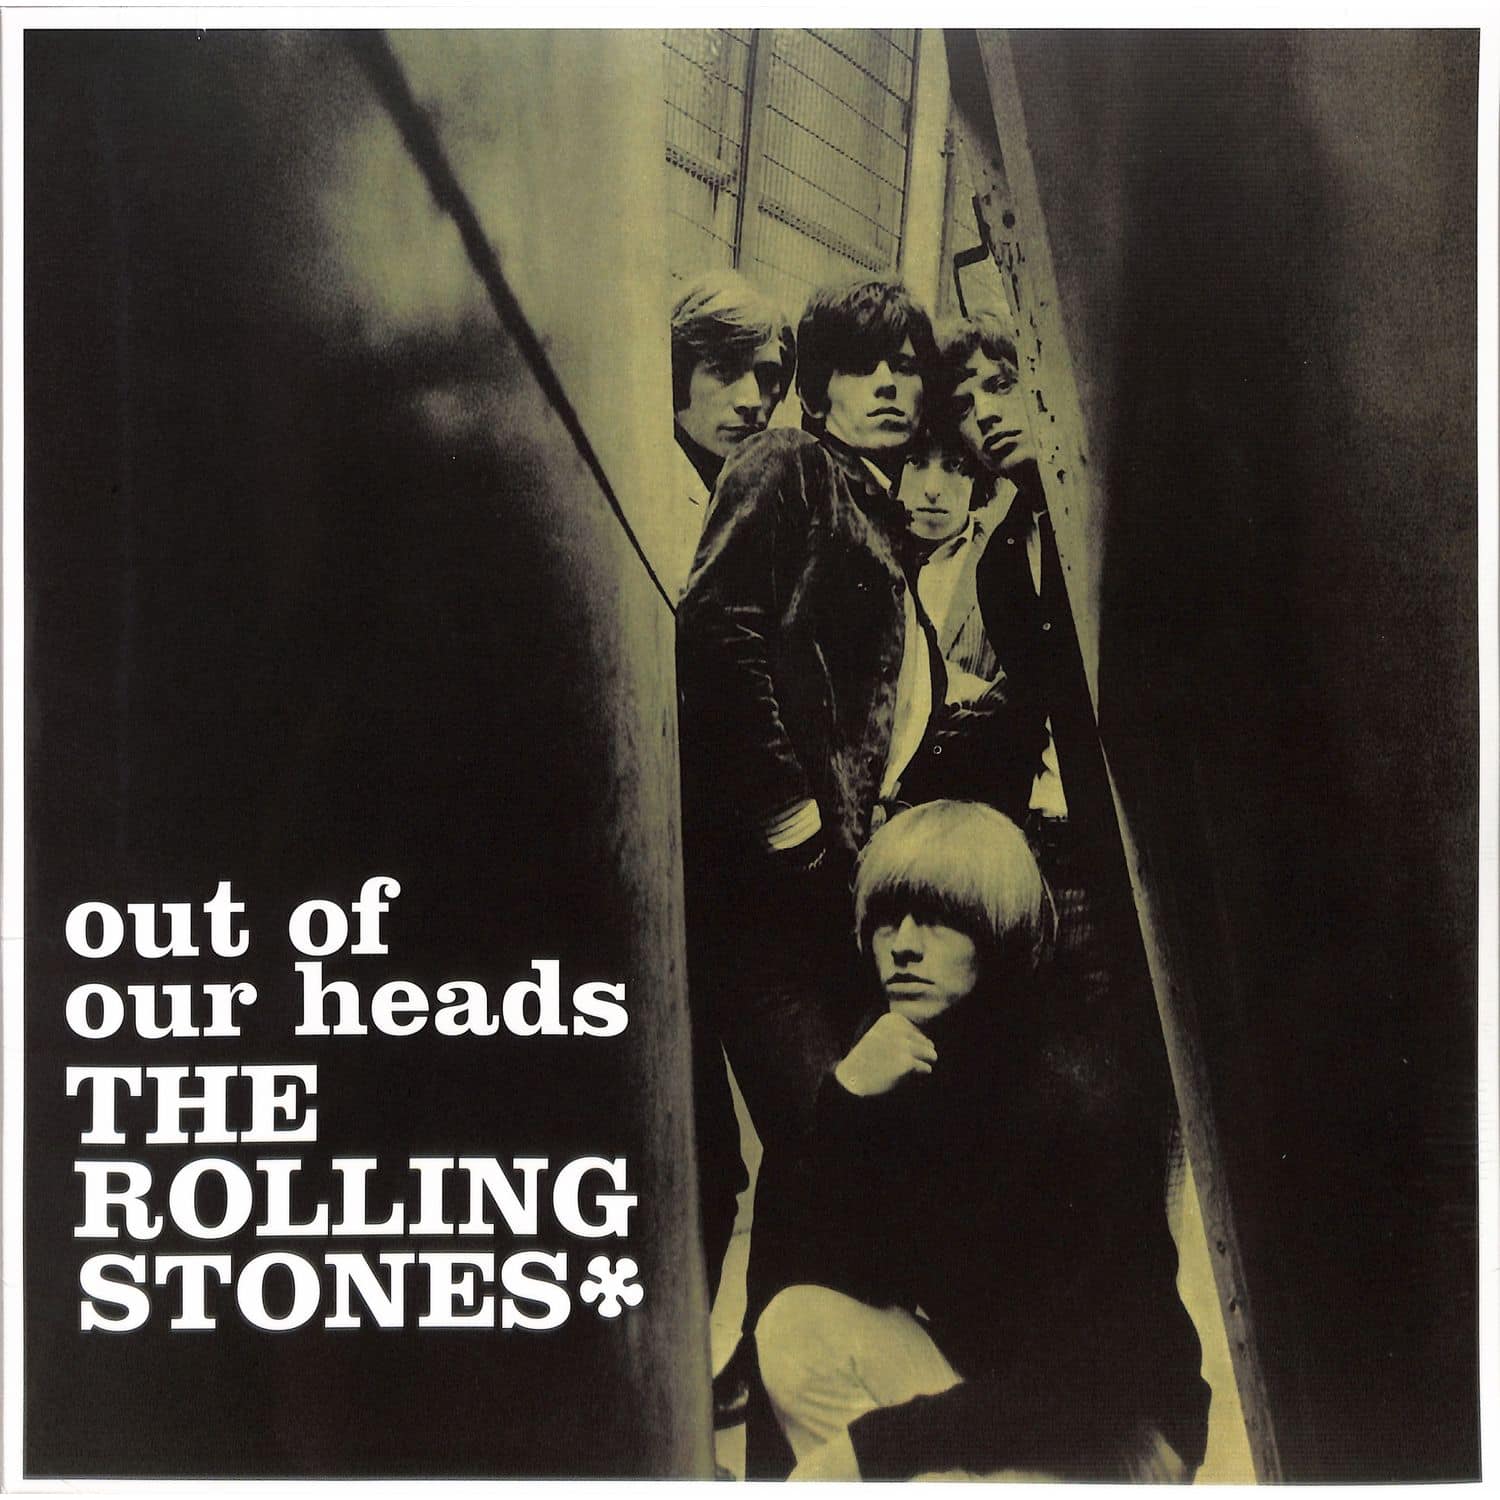 The Rolling Stones - OUT OF OUR HEADS 